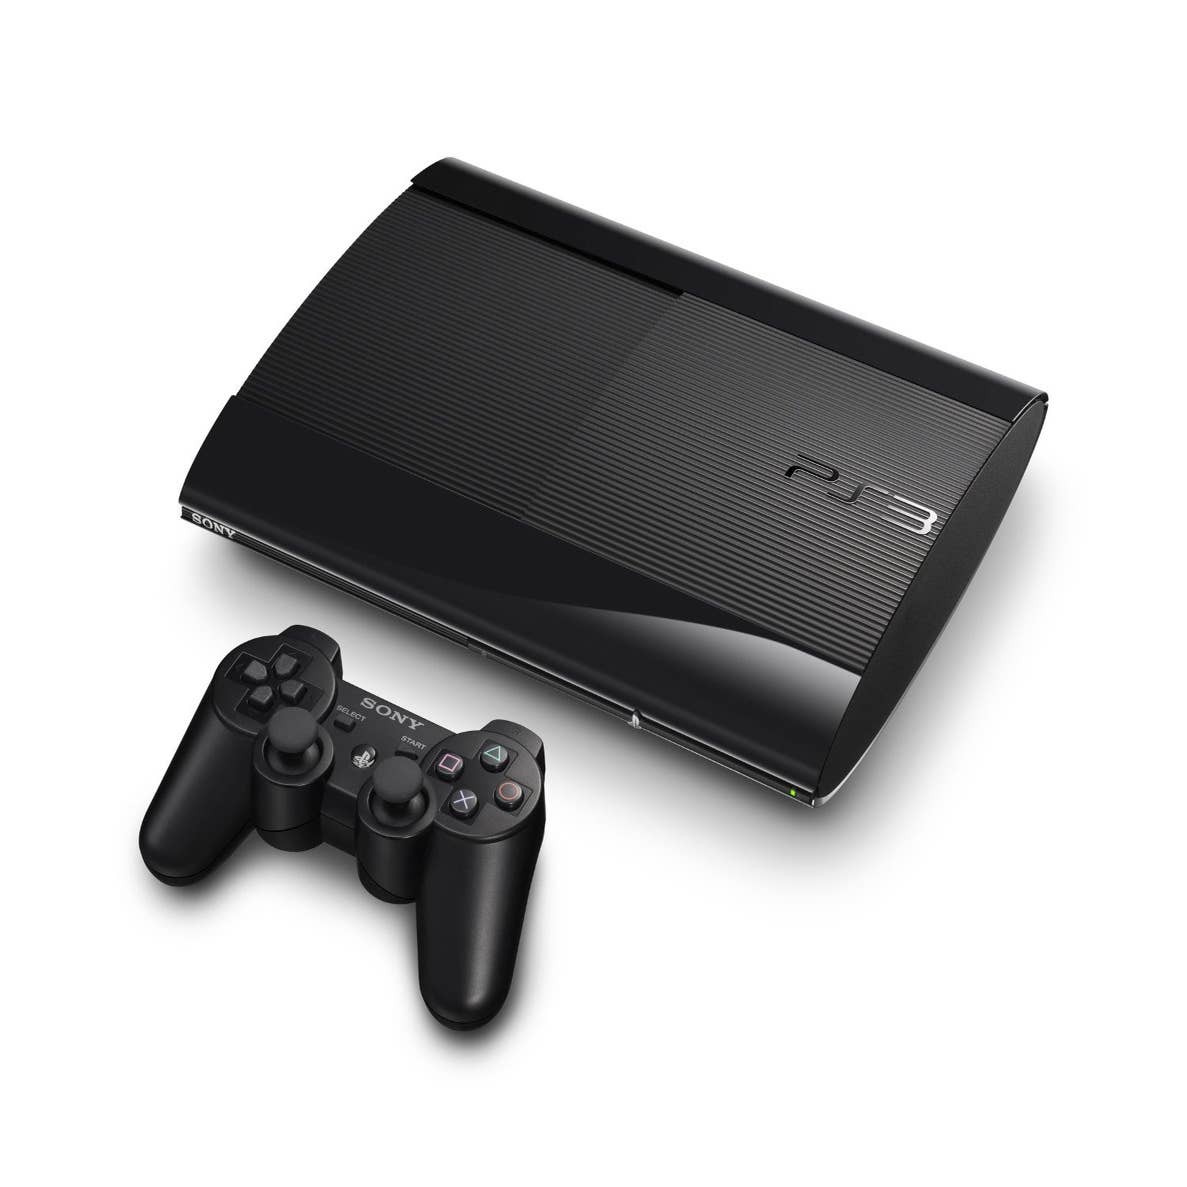 PlayStation 3's last system update seemingly killed console for good